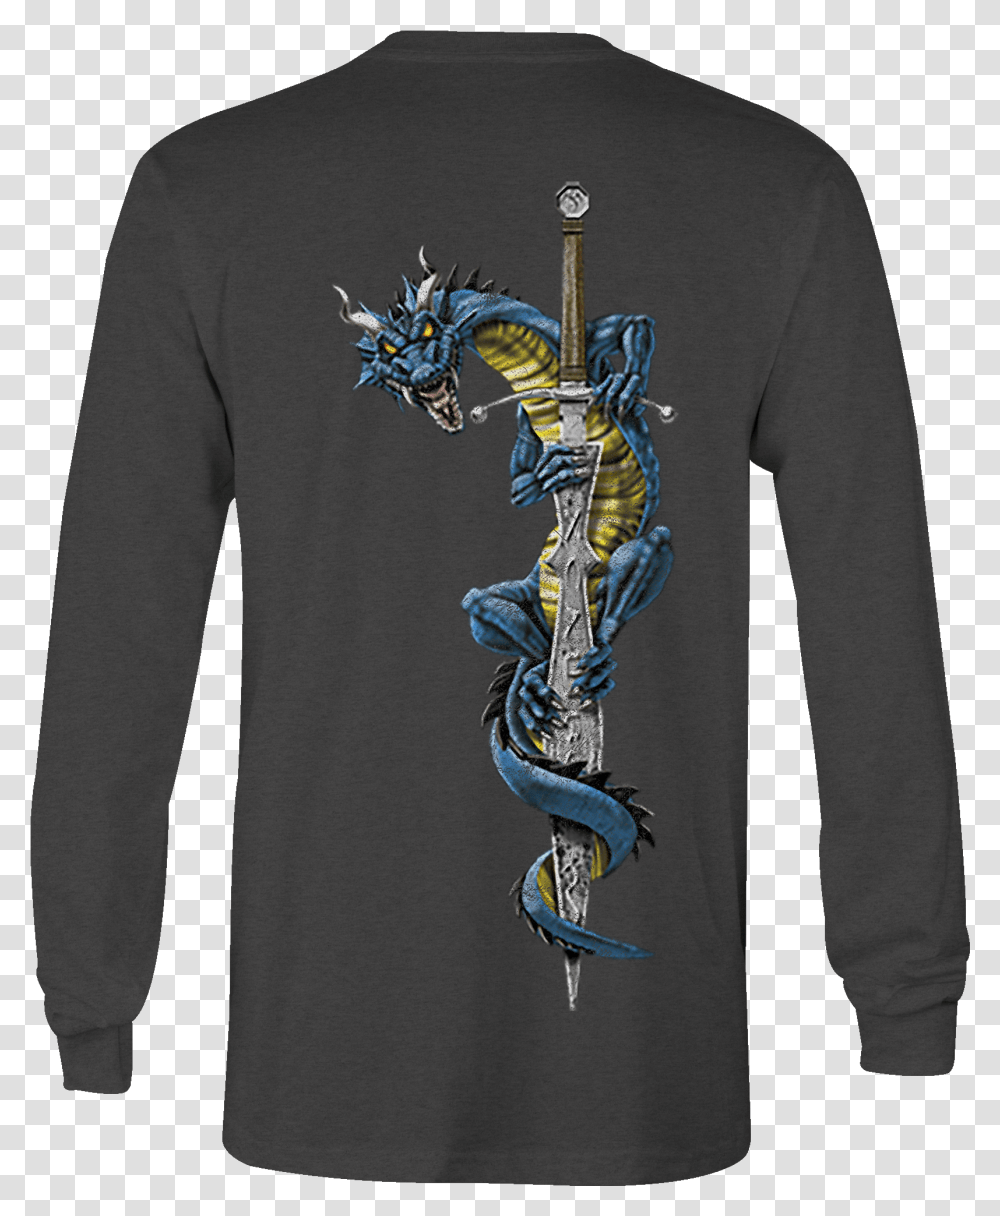 Details About Long Sleeve Tshirt Dragon Knight Sword Shirt For Men Or Women, Clothing, Apparel, Skateboard, Sport Transparent Png